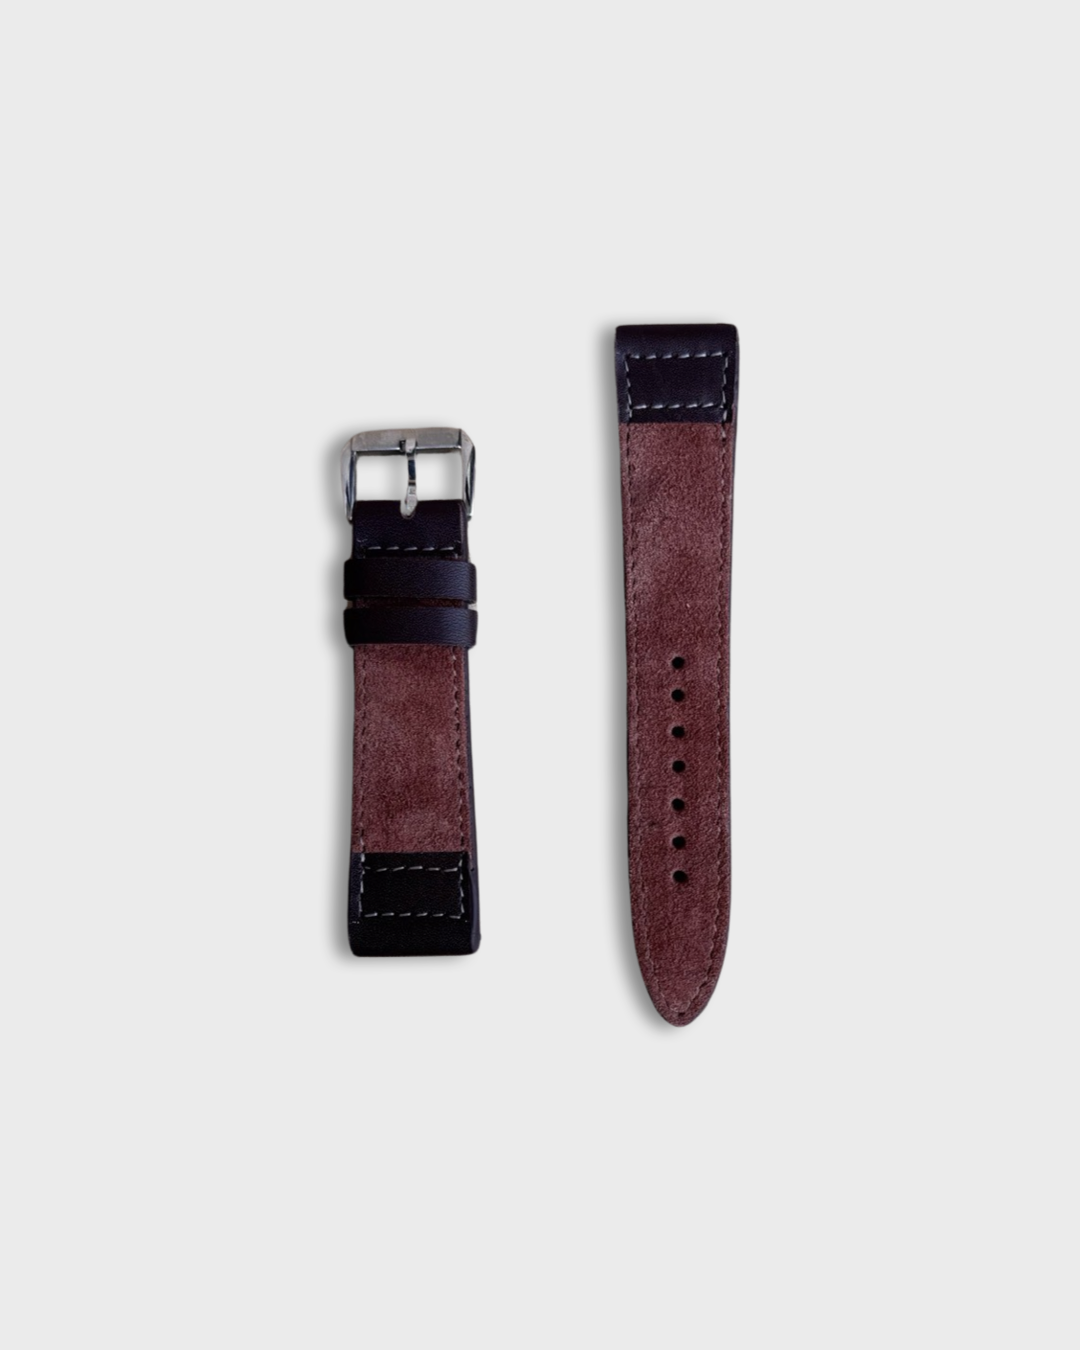 THE SVELTE PILOT STRAP - FOR QUARTZ, MECHANICAL & SMART WATCHES [Pilot-style Stitch in Suede Leather] My Store